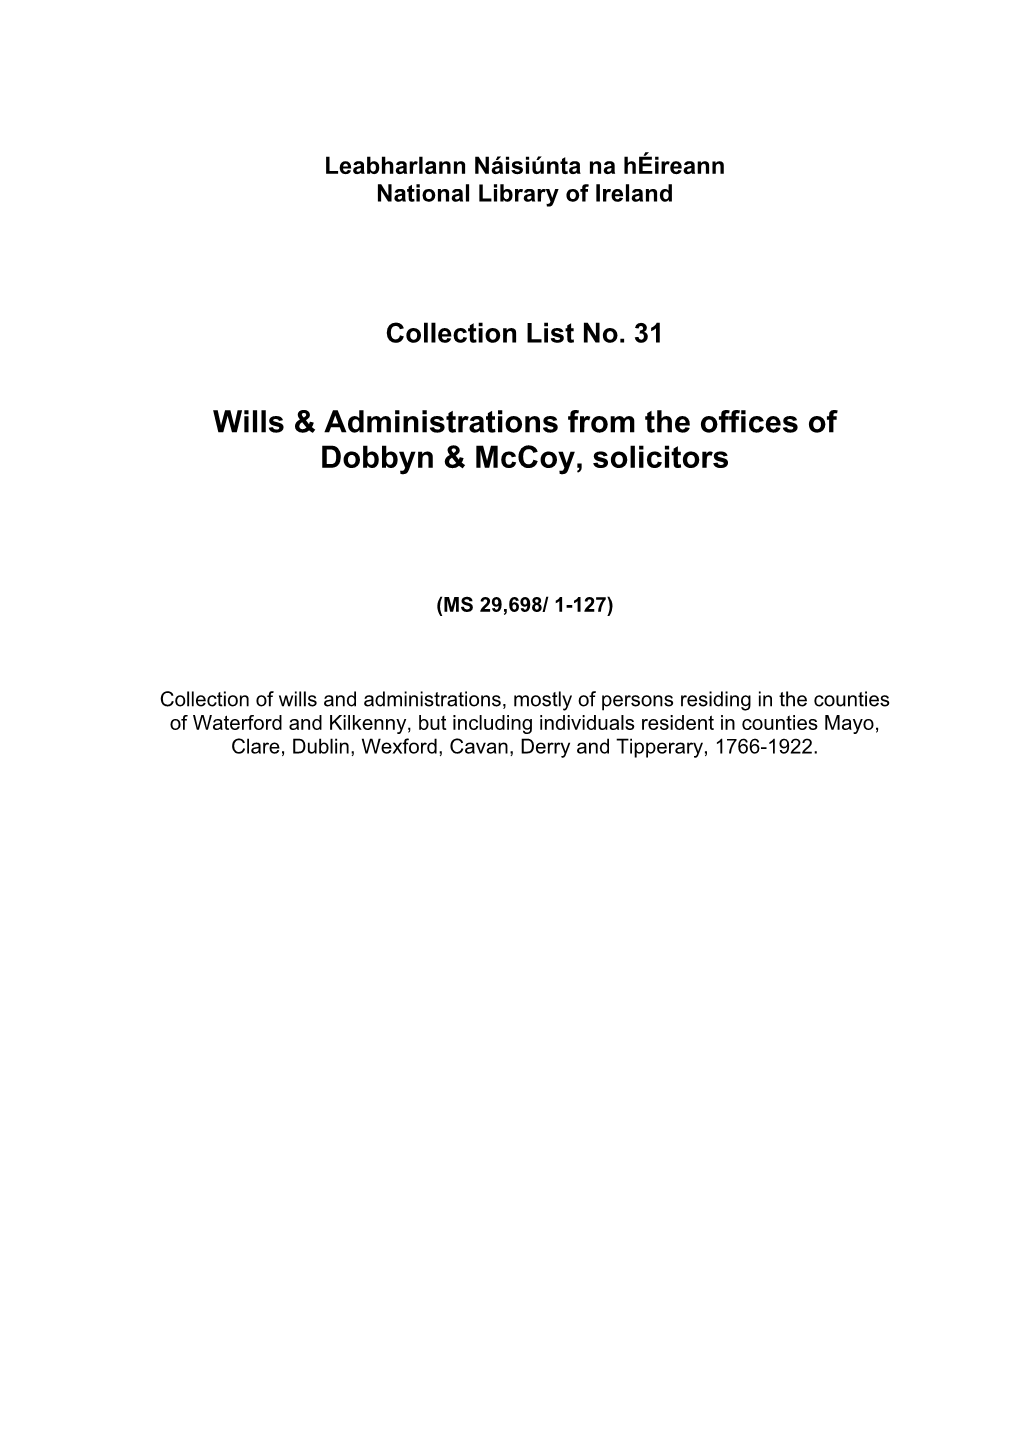 Wills & Administrations from the Offices of Dobbyn & Mccoy, Solicitors